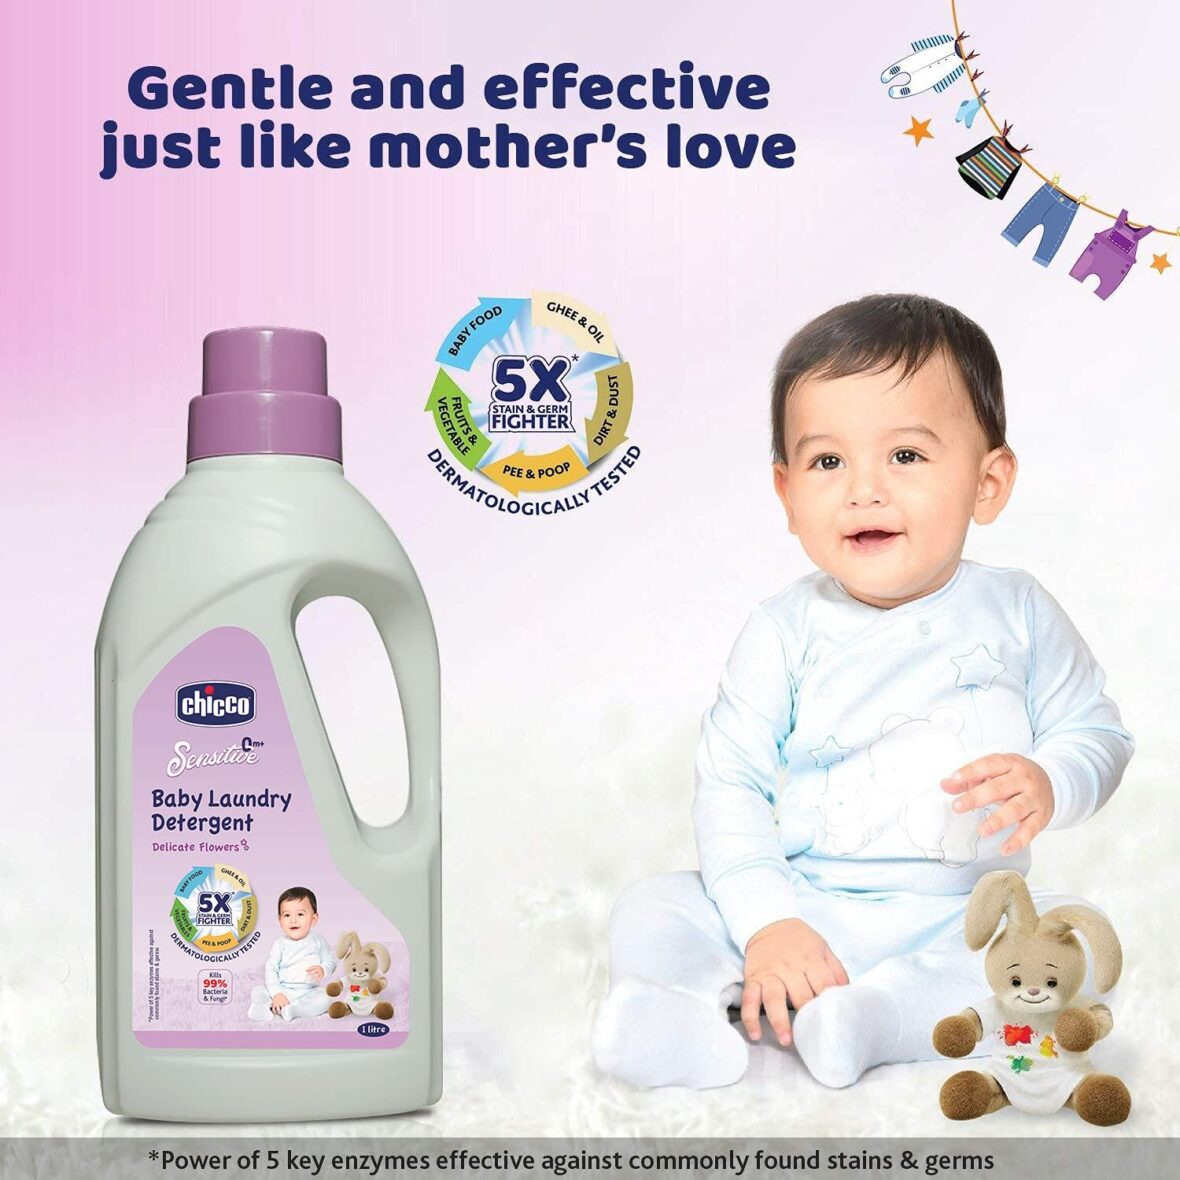 Chicco Baby Liquid Laundry Detergent, 5X Stain & Germ Fighter, Kills 99% of Germs, Dermatologically Tested for Effective & Gentle Cleaning, Delicate FLowers (1 L)